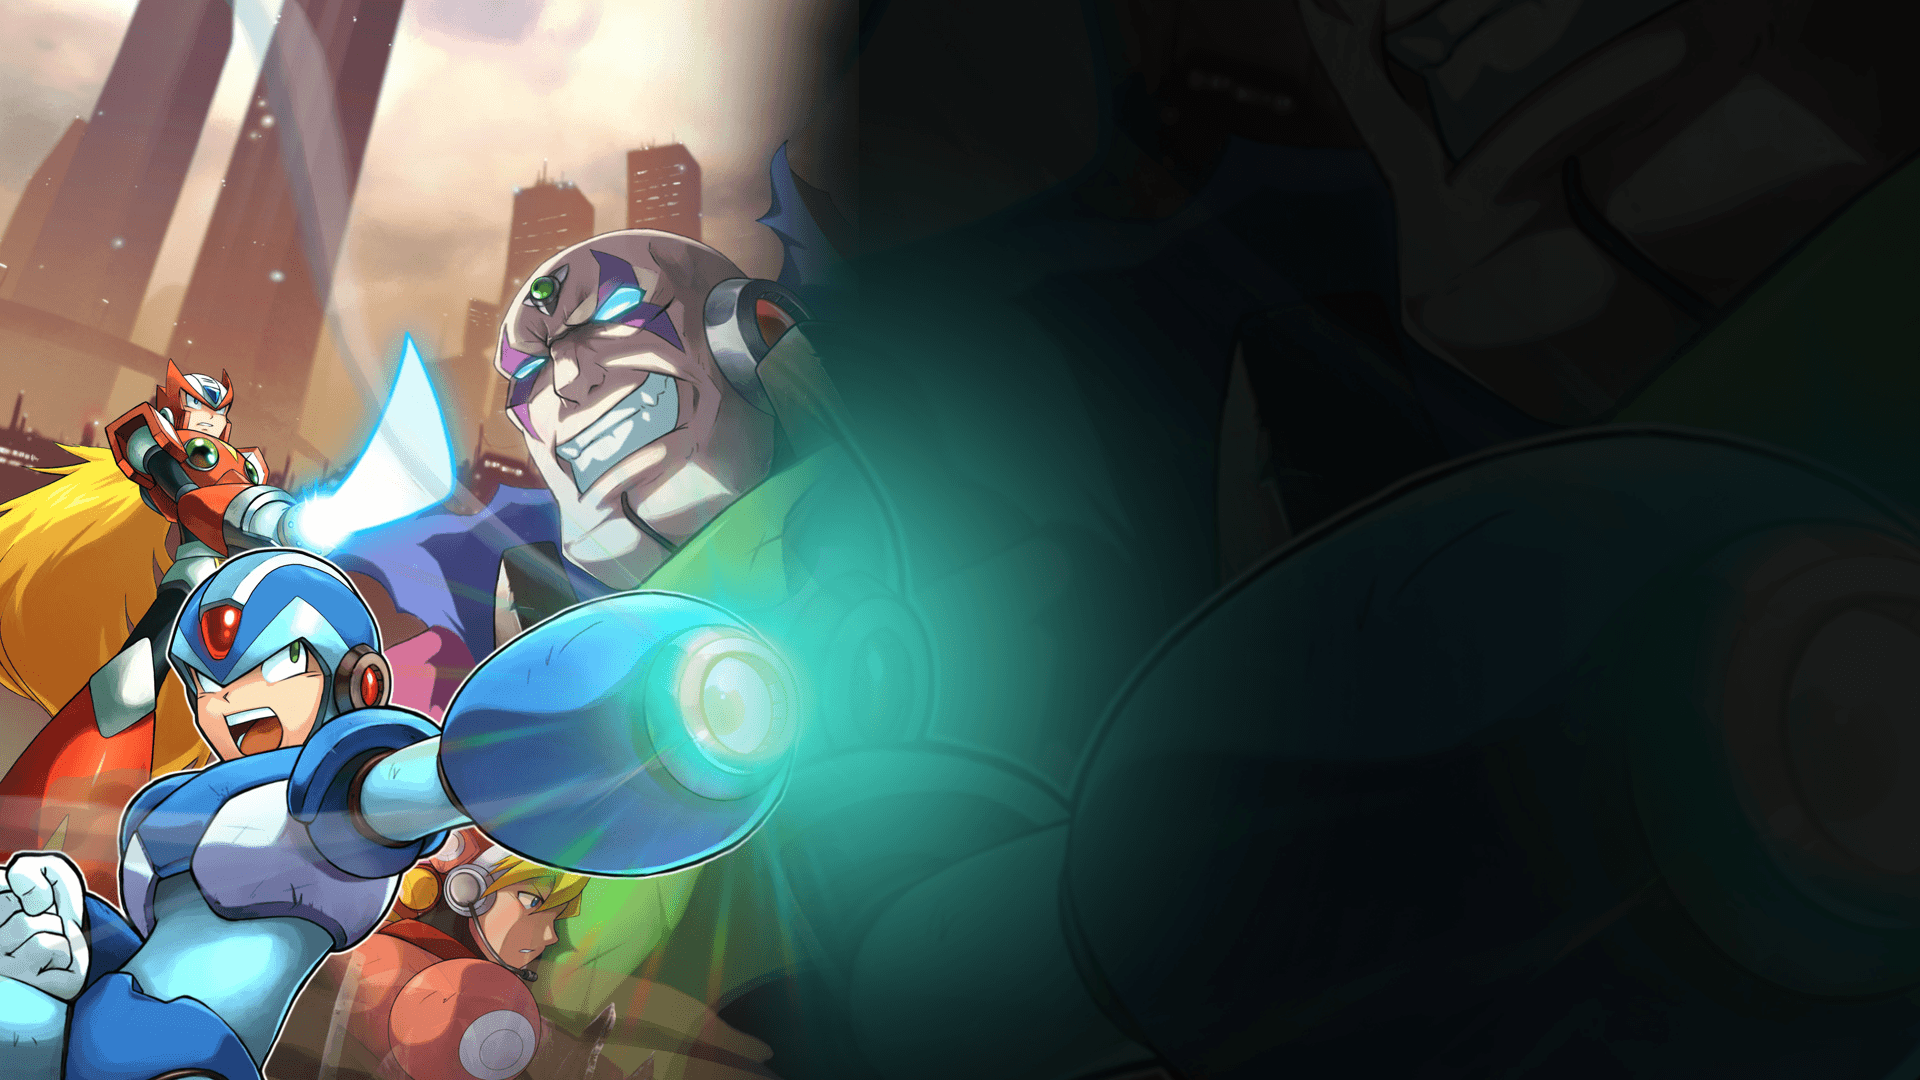 Collection of 56 of my favorite Megaman Wallpaper